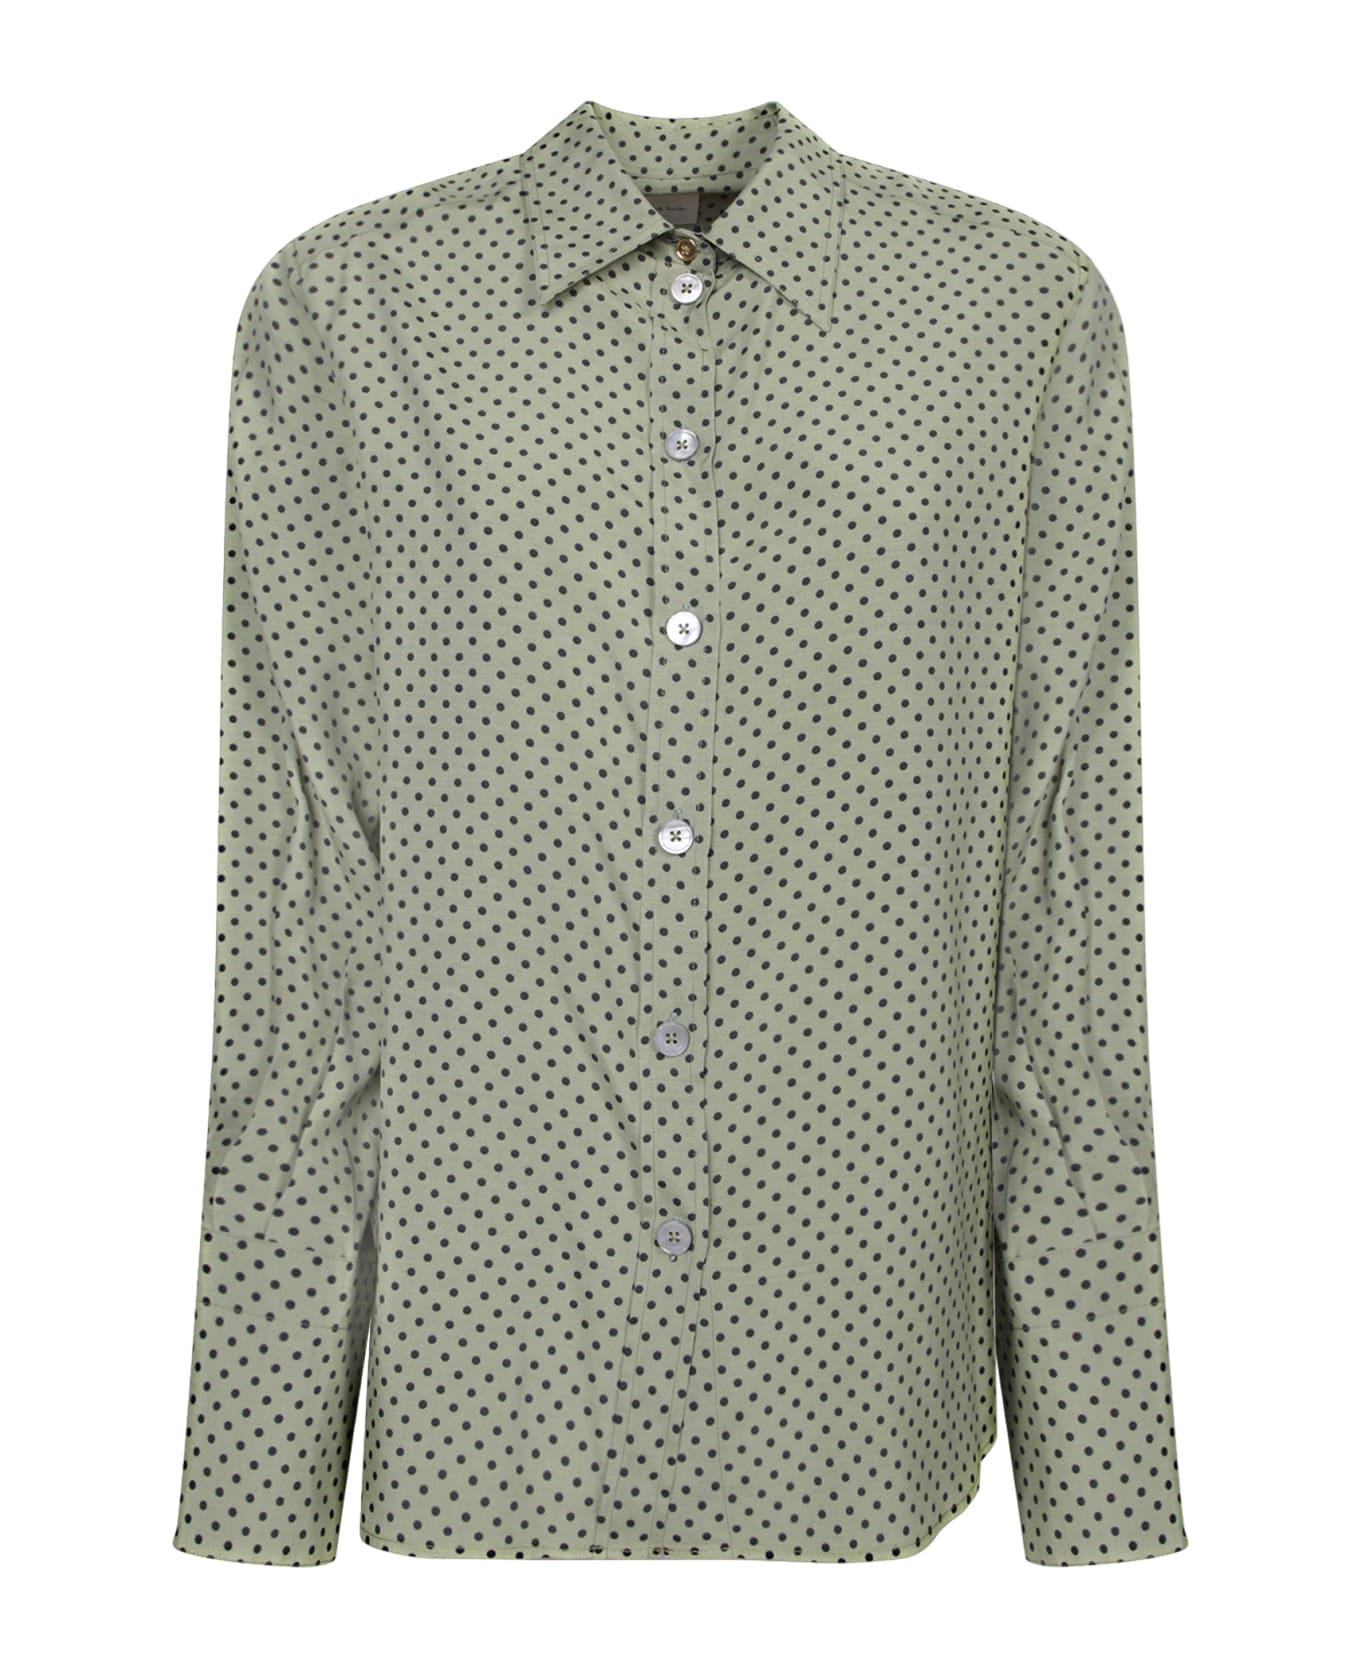 Paul Smith Patterned Green Shirt - Green